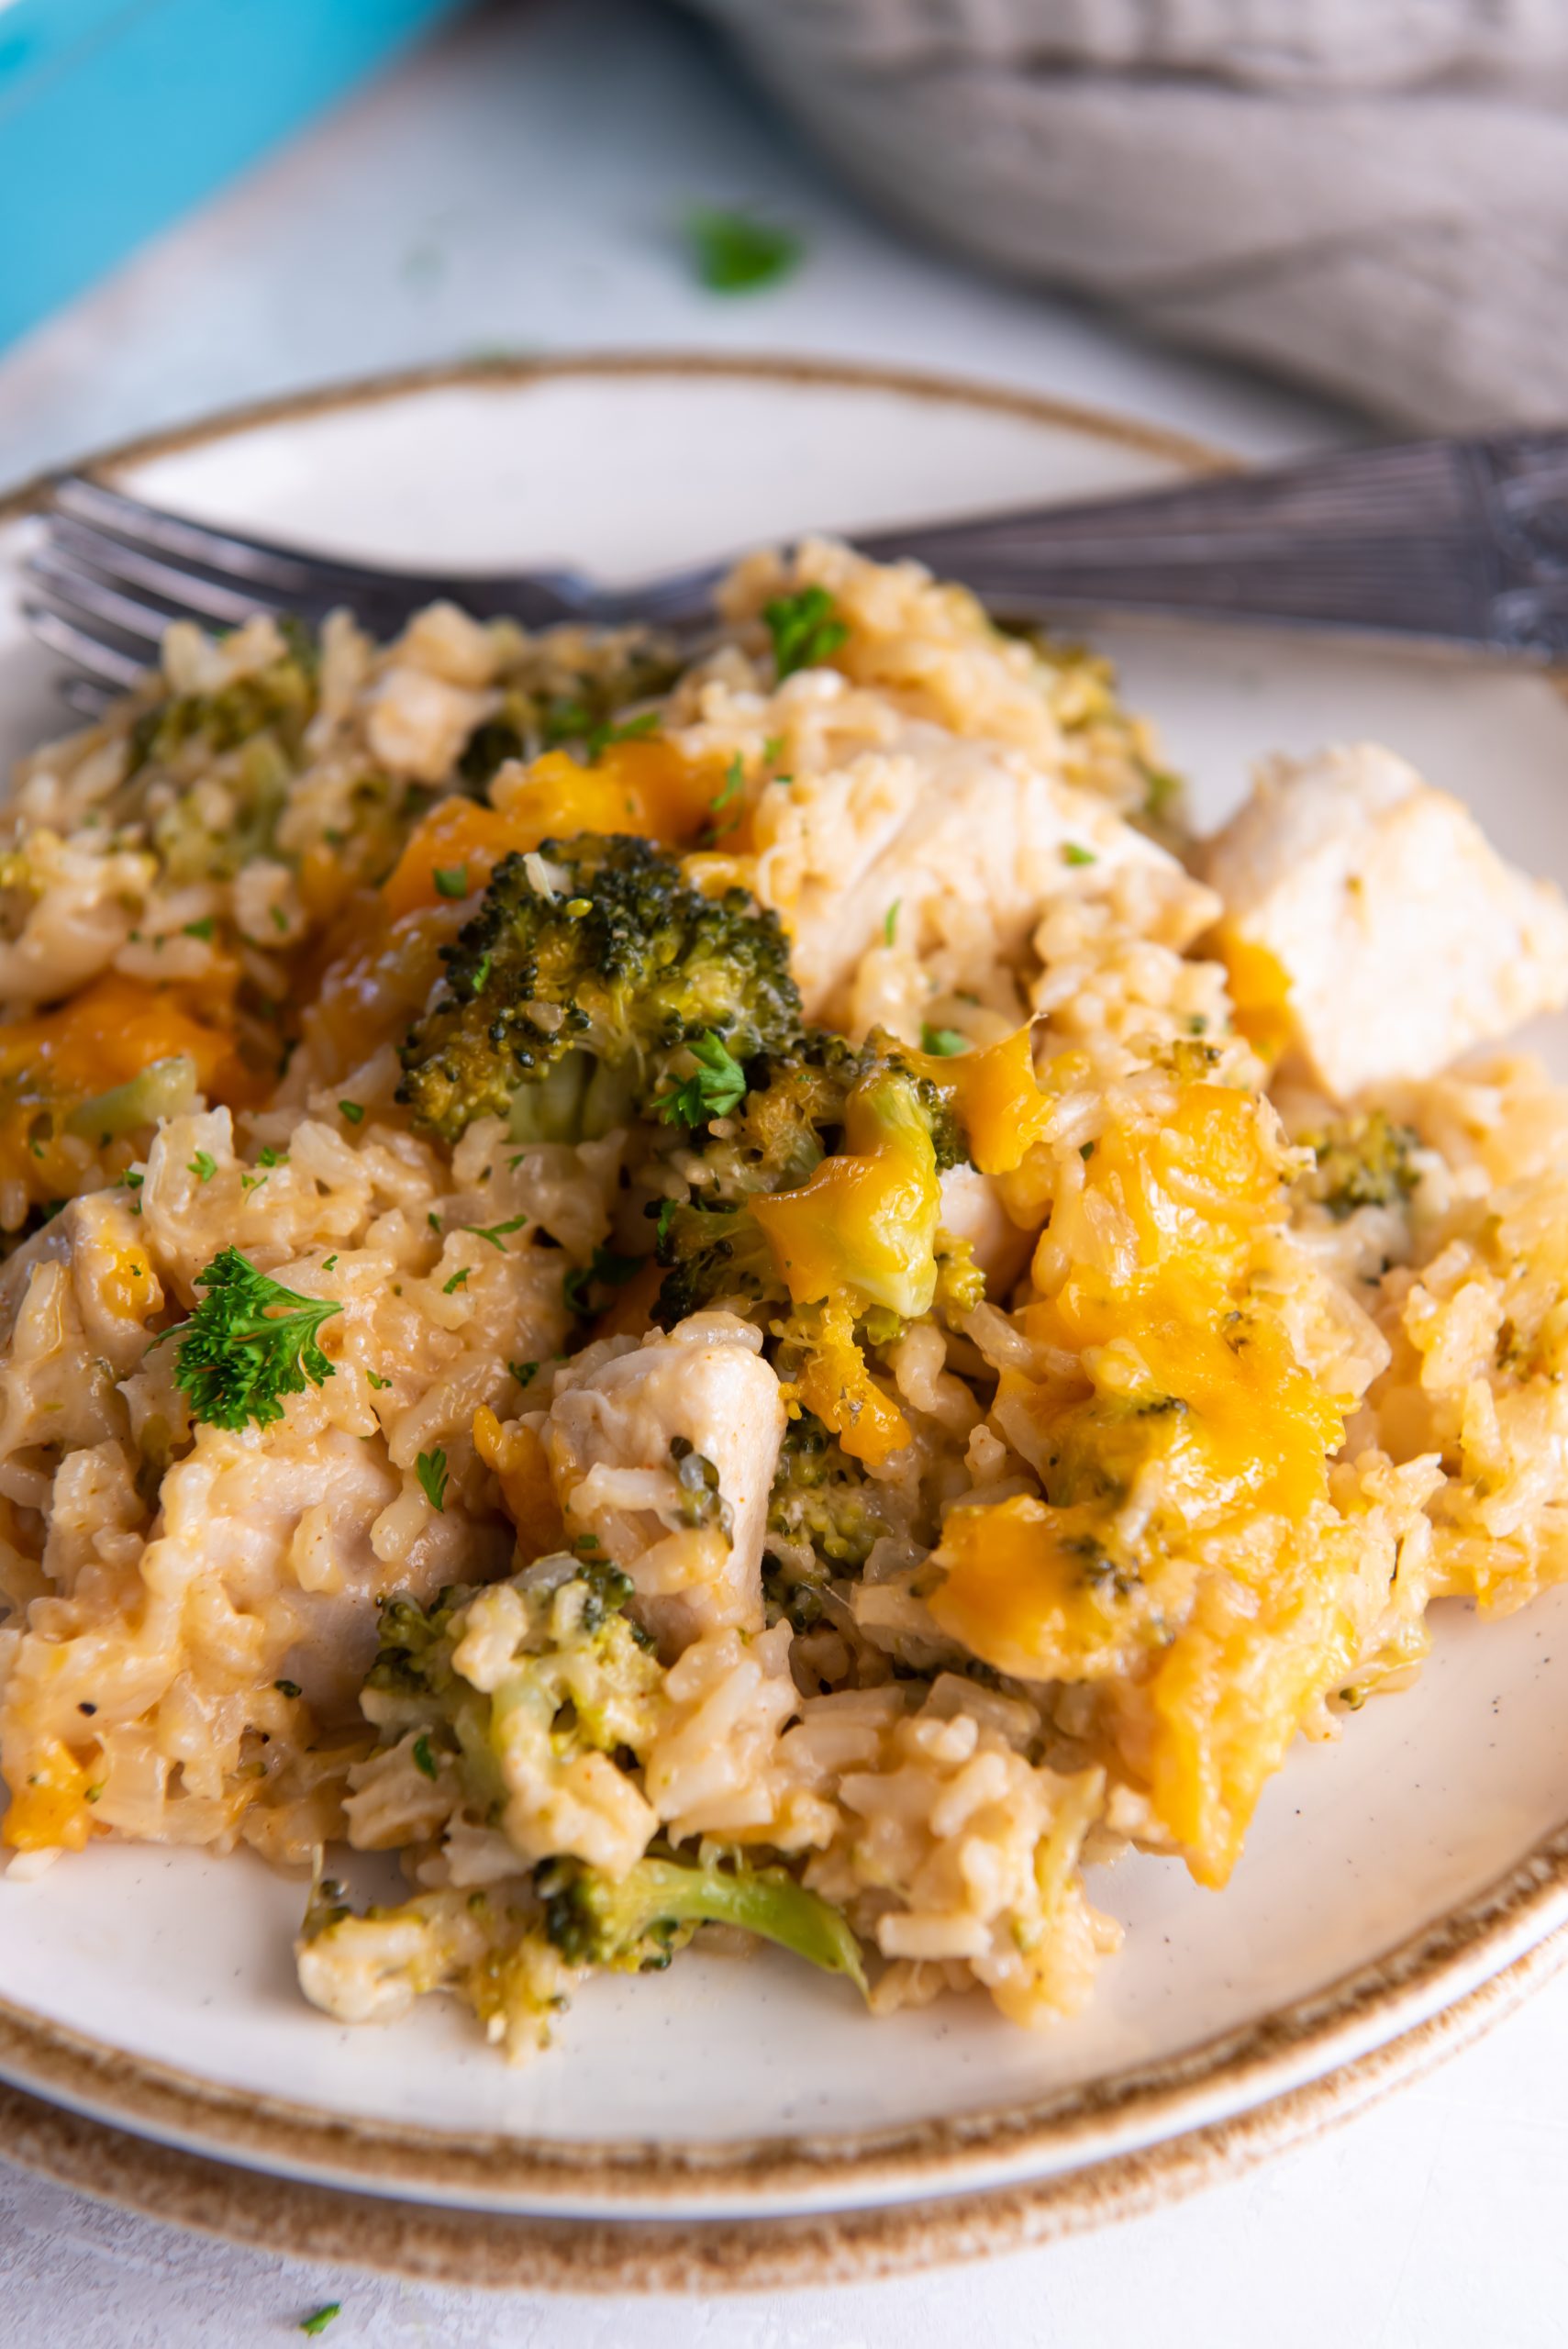 Serving of chicken broccoli rice casserole on a plate.